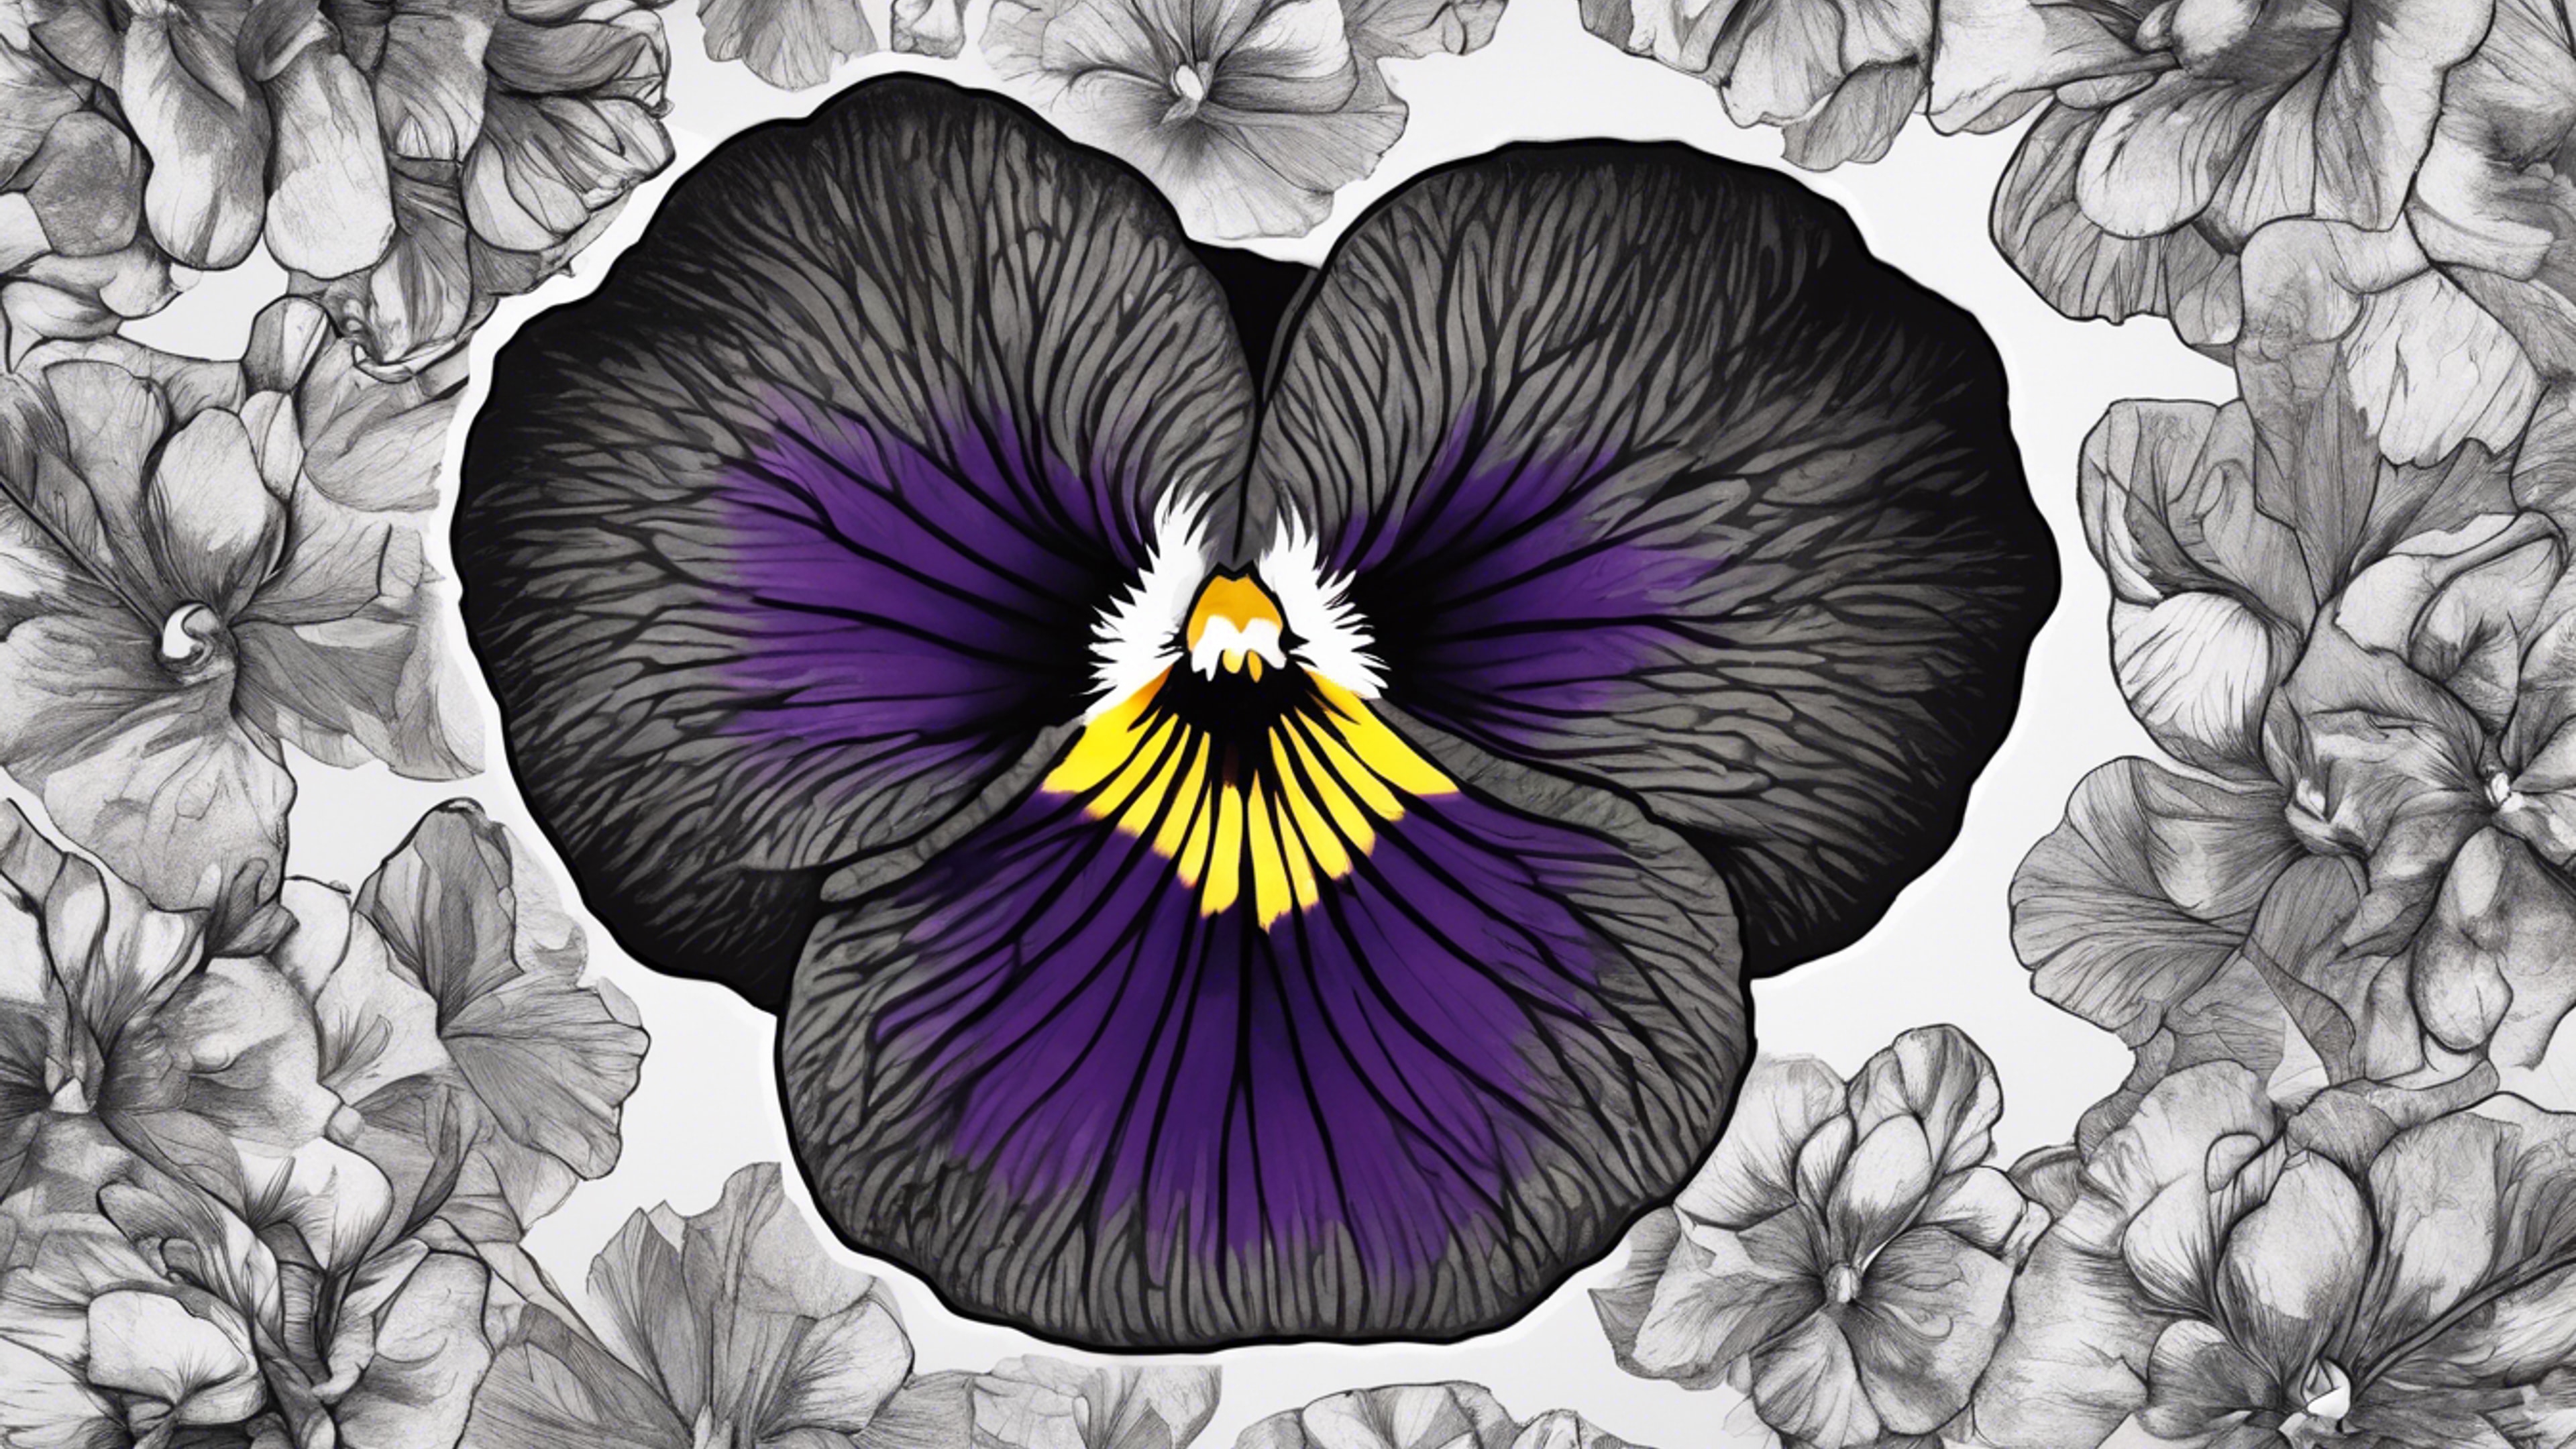 A beautifully detailed drawing of a black pansy with a heart-shaped pattern in the center. Tapetai[63bdabf8c2fc479fa211]